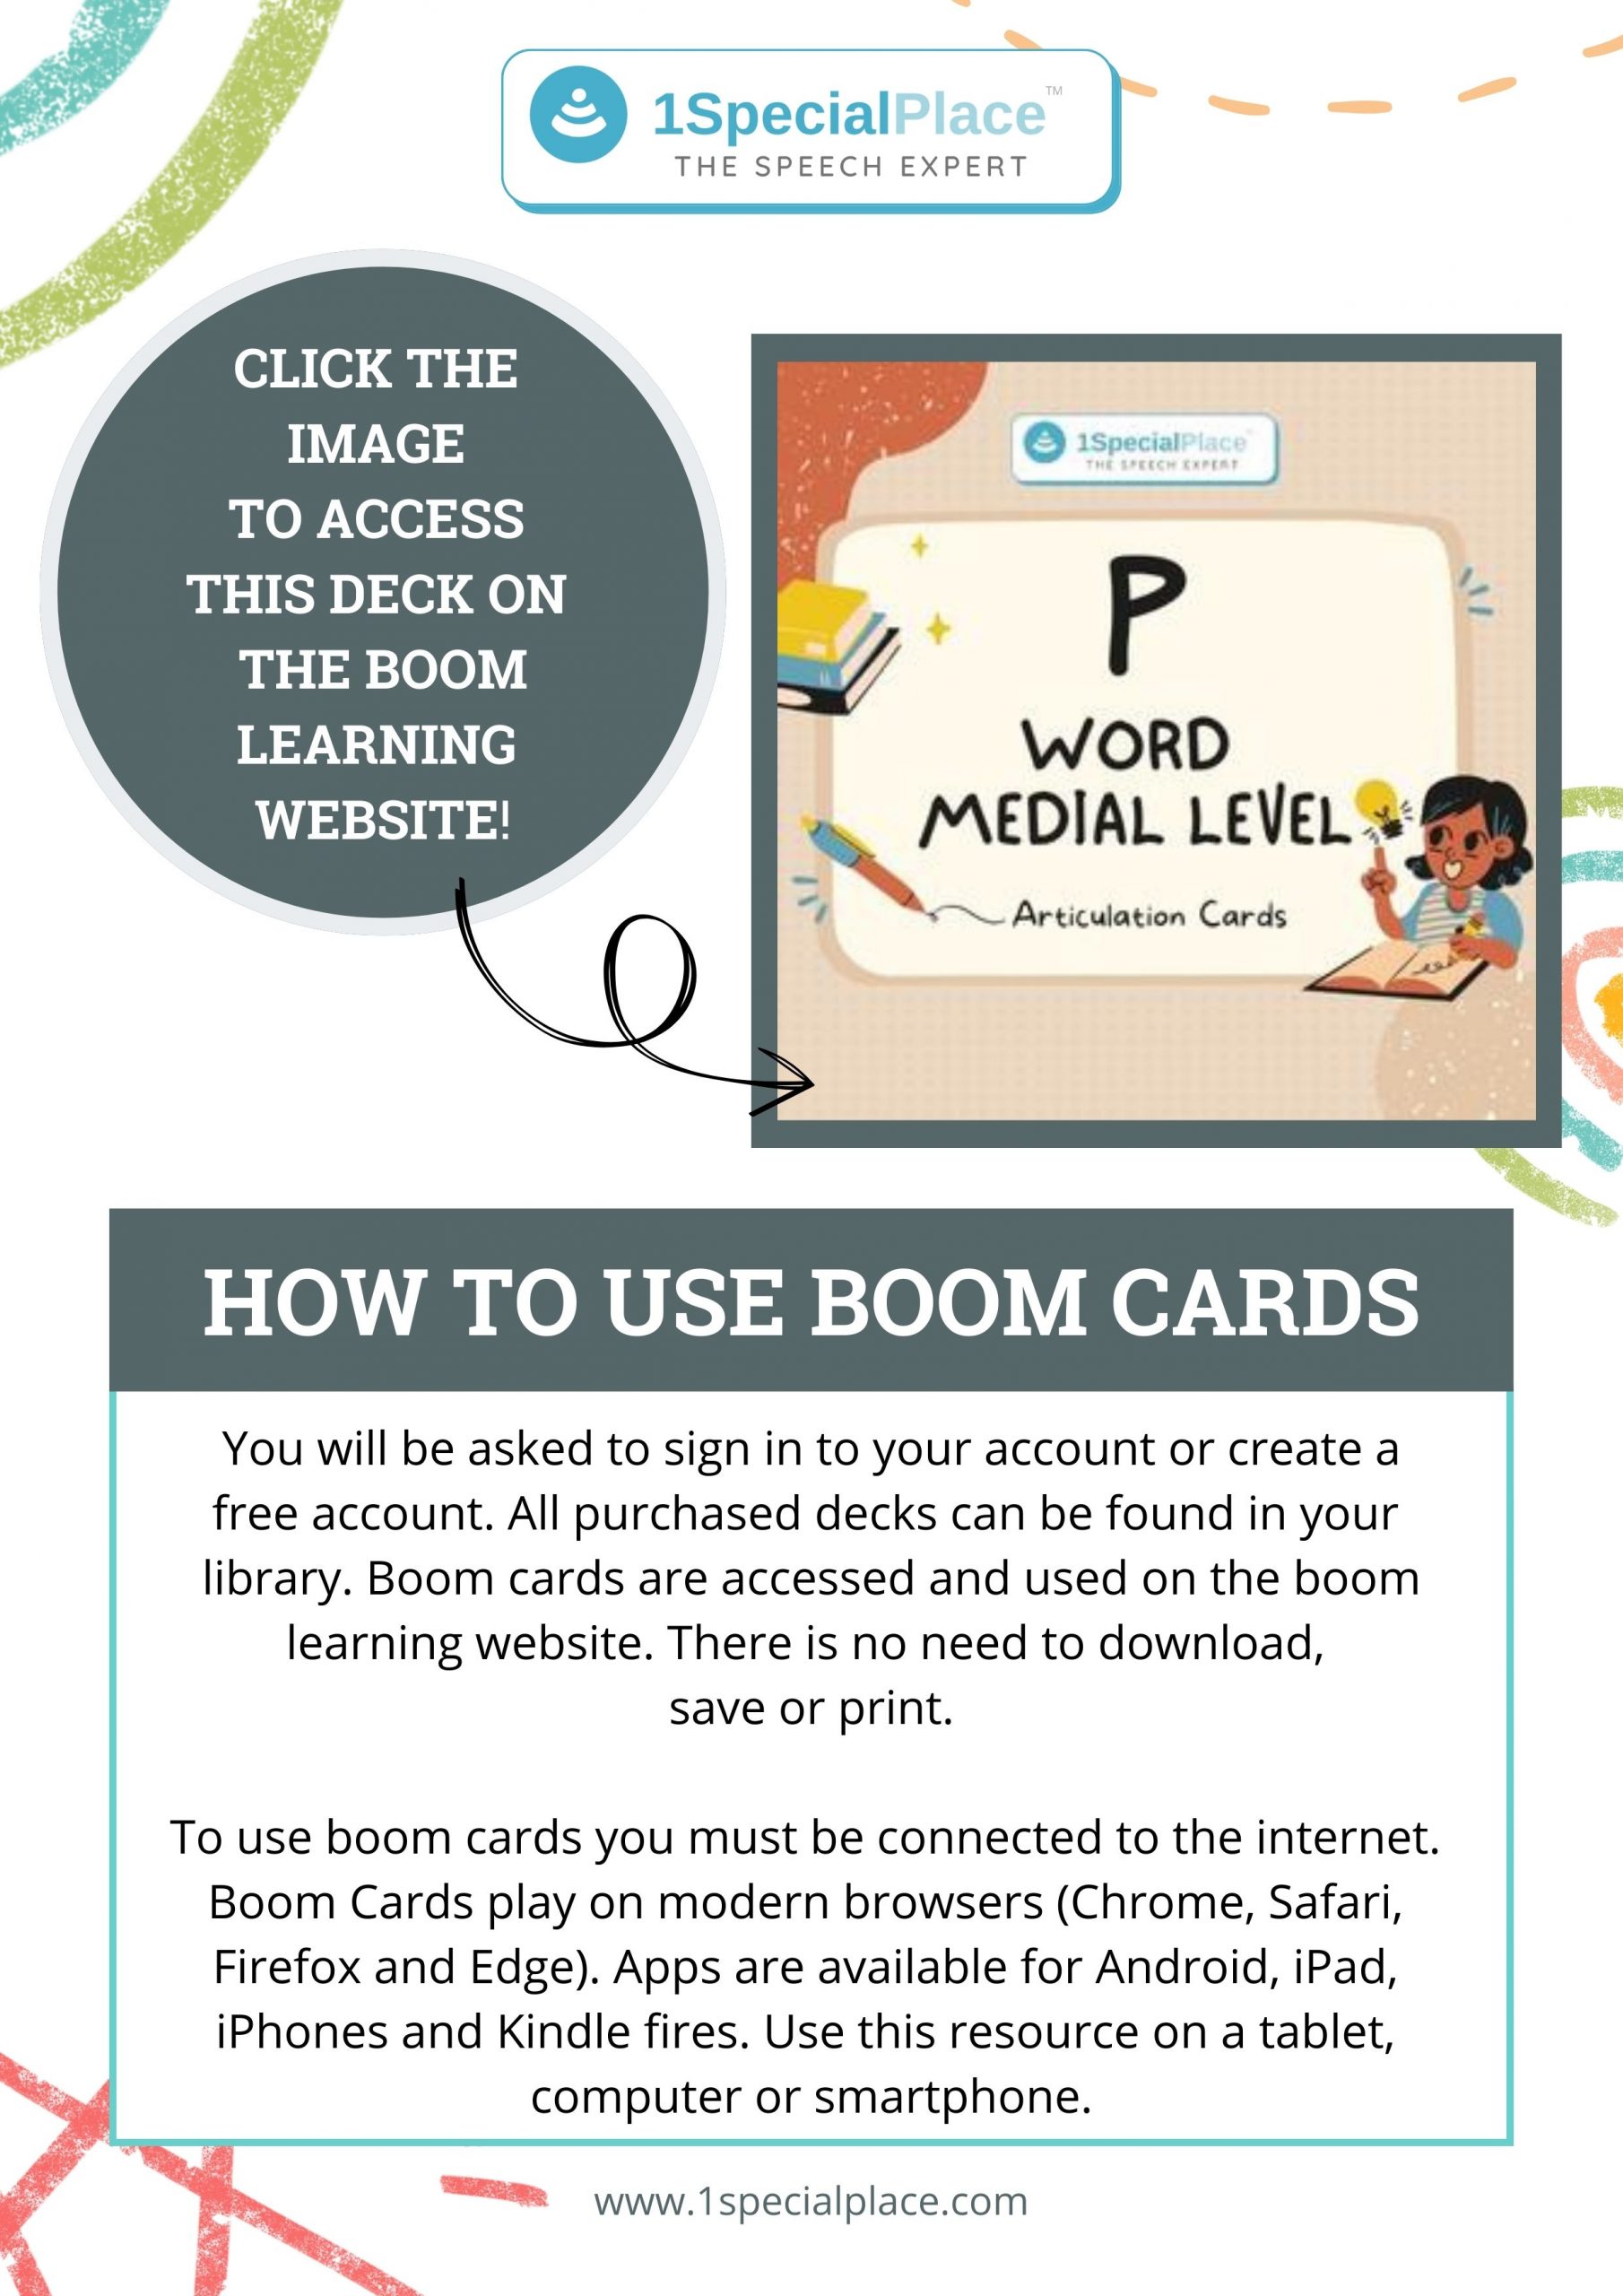 P word medial levels boom cards 2